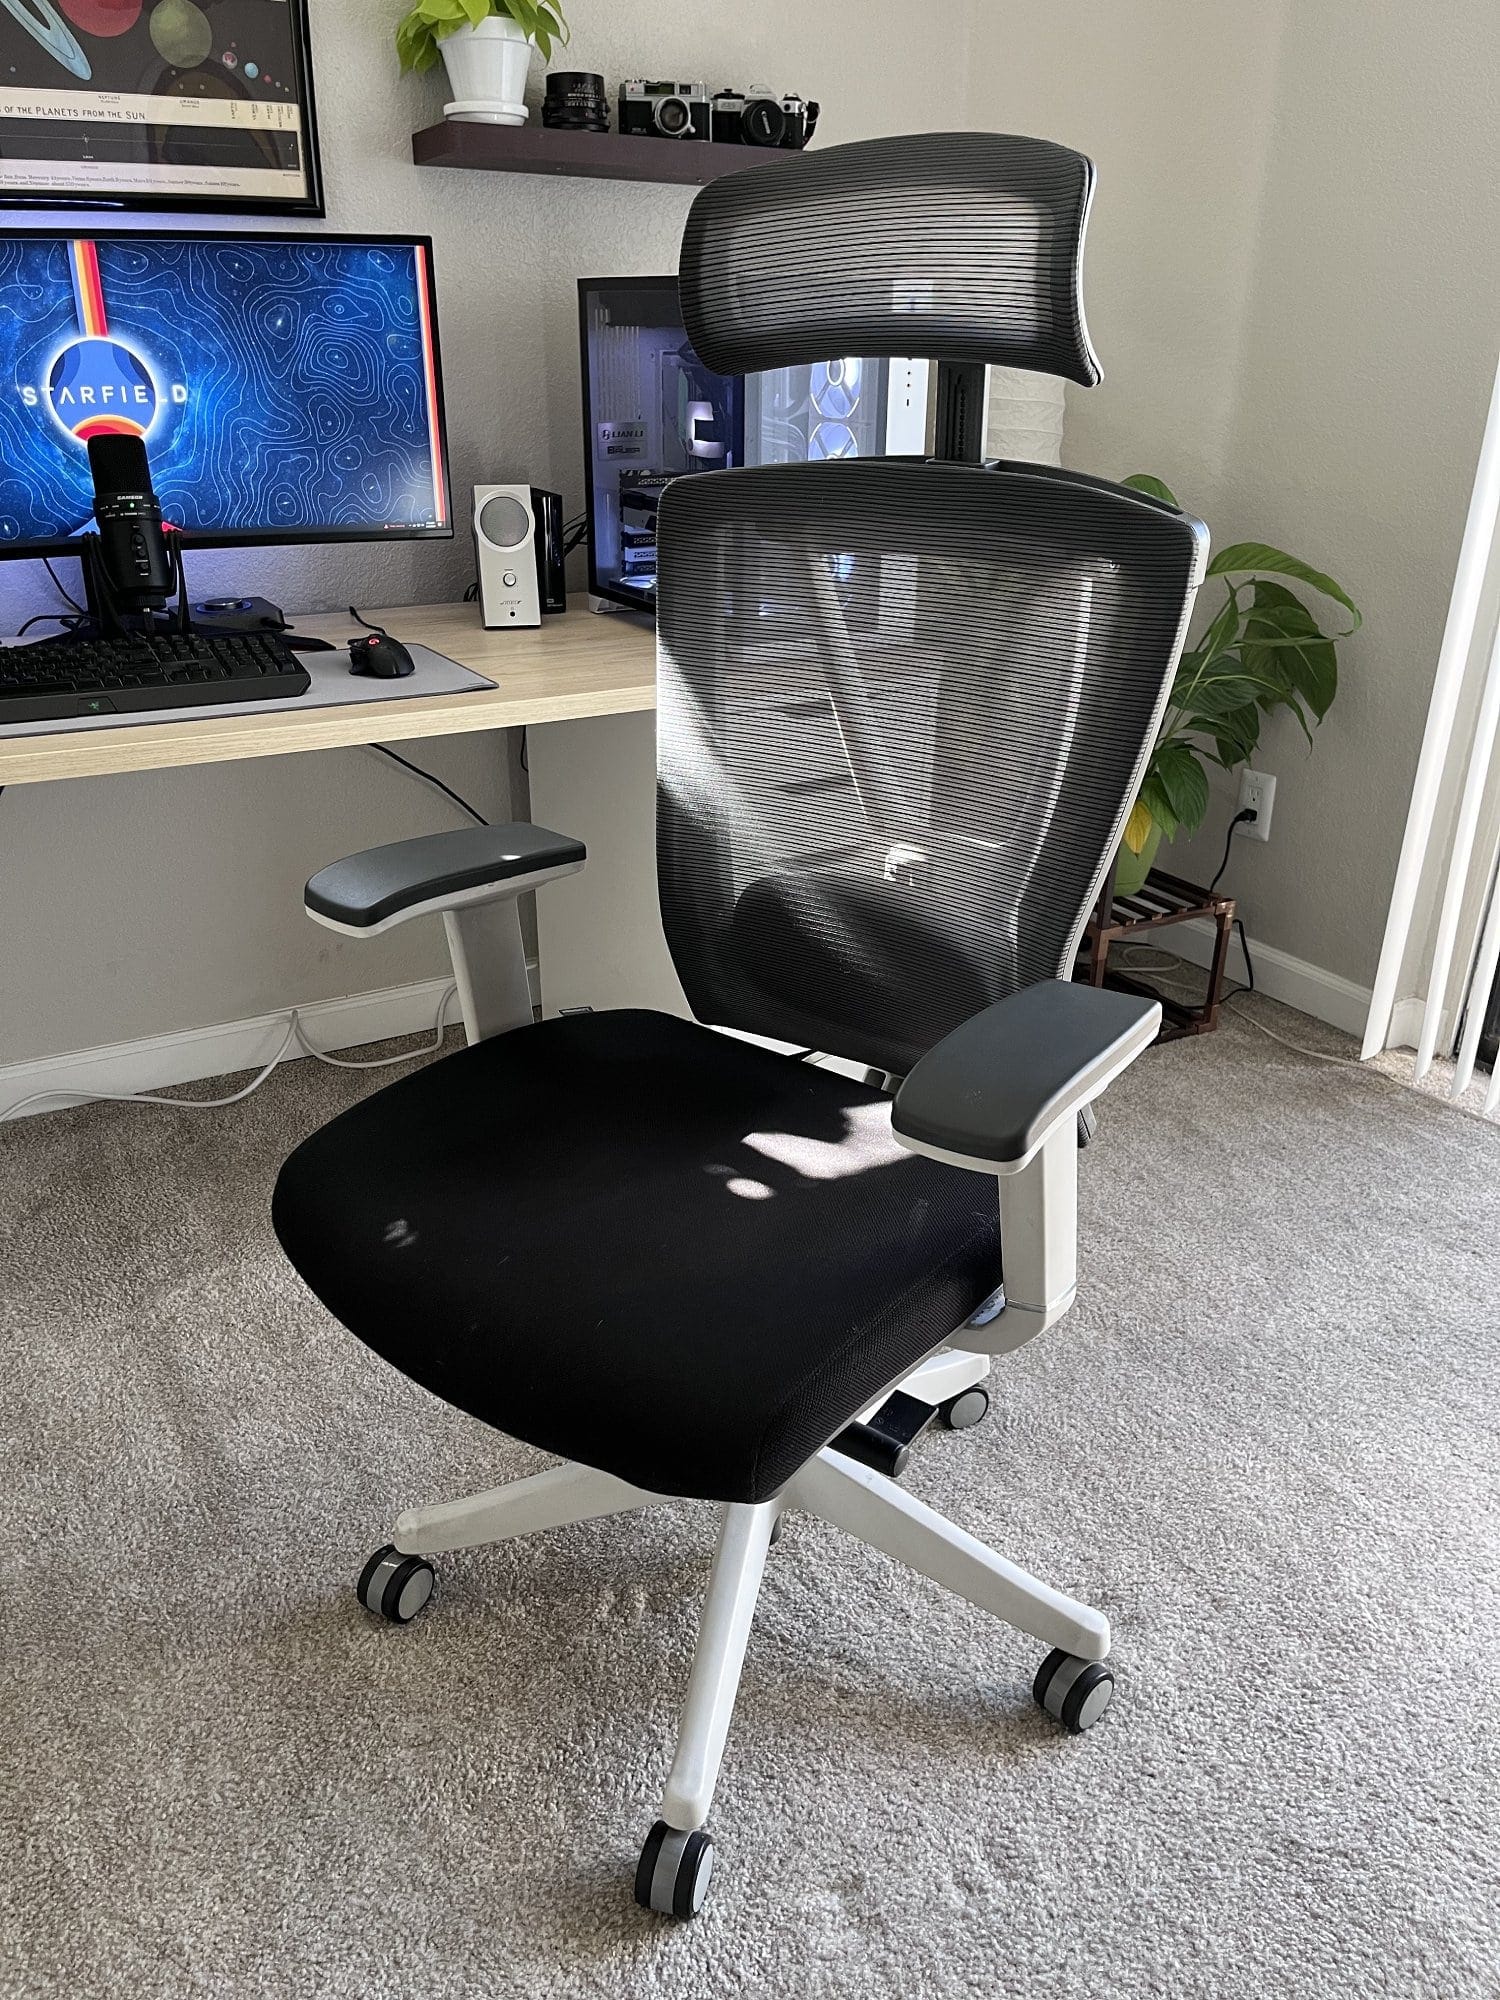 An ergonomic office chair with a mesh backrest and headrest, in front of a desk with computer setup and decorative shelves in a home office